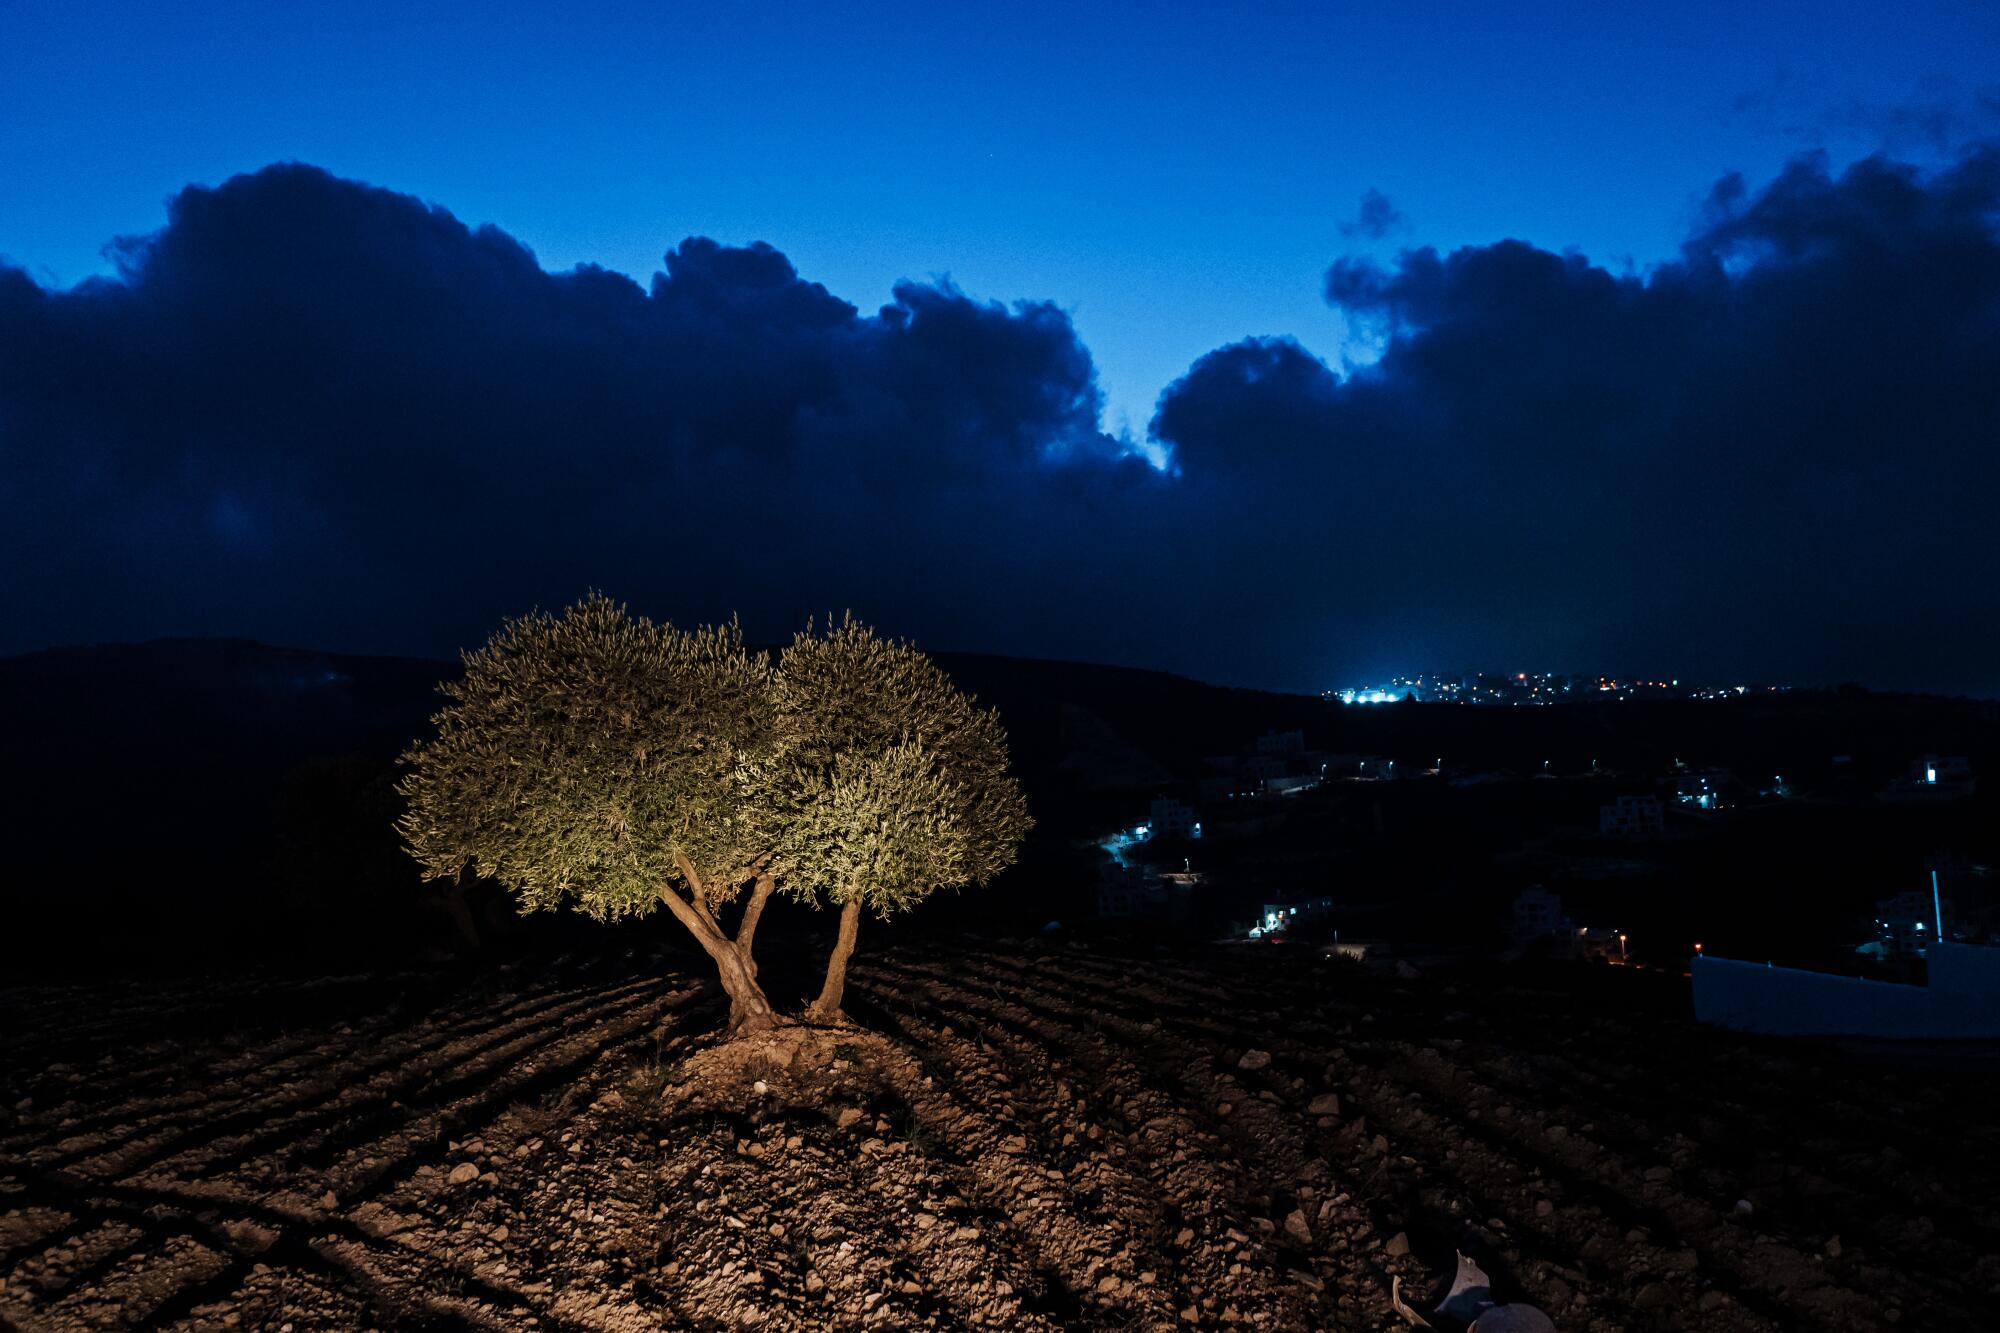 A light shines on a tree in the dirt against a darkening sky with darker clouds 